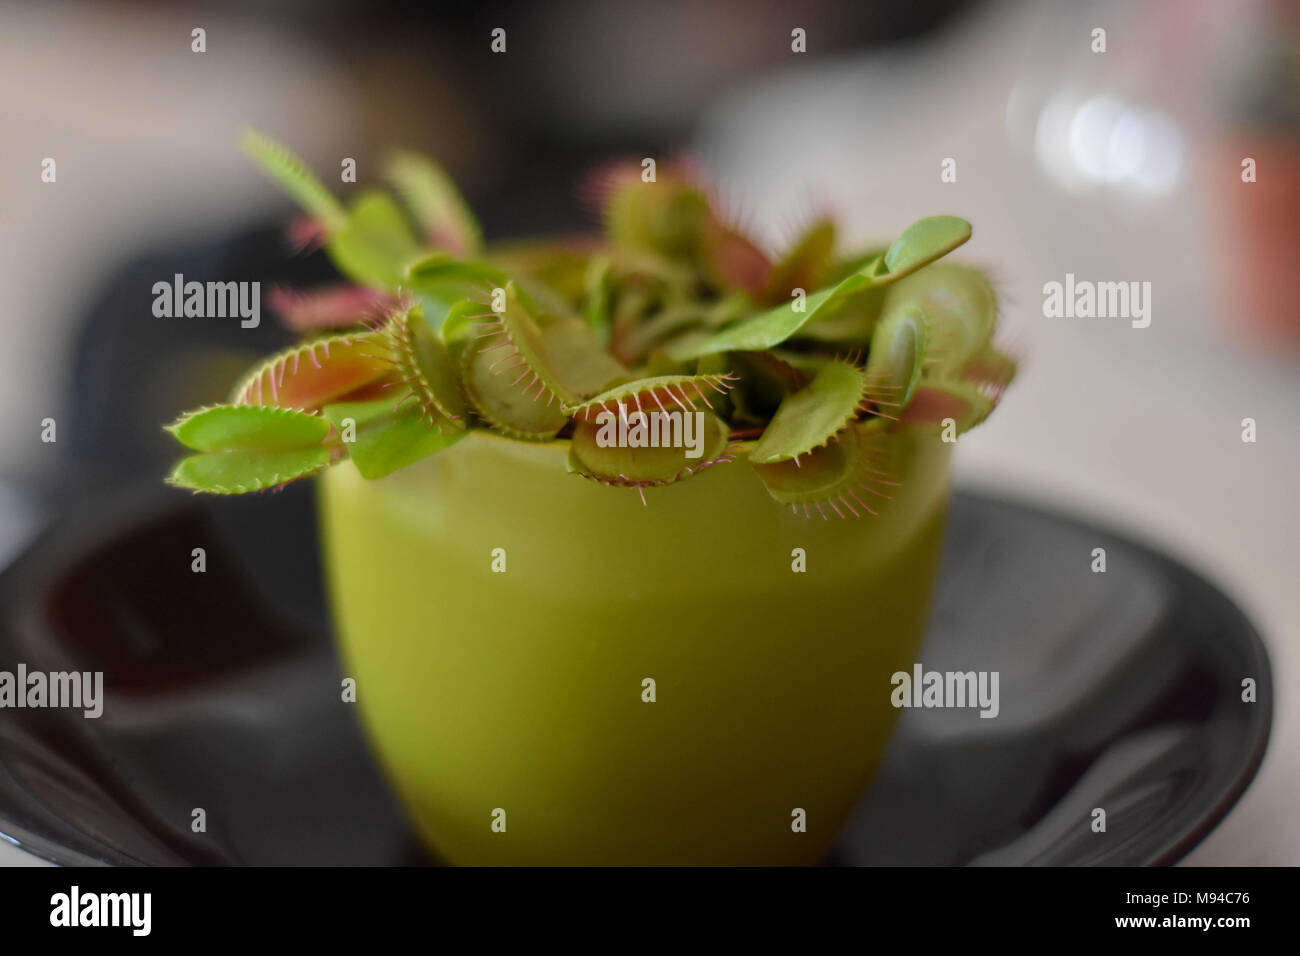 Venus fly trap in the flower pot at black plate/ insect catcher Stock Photo